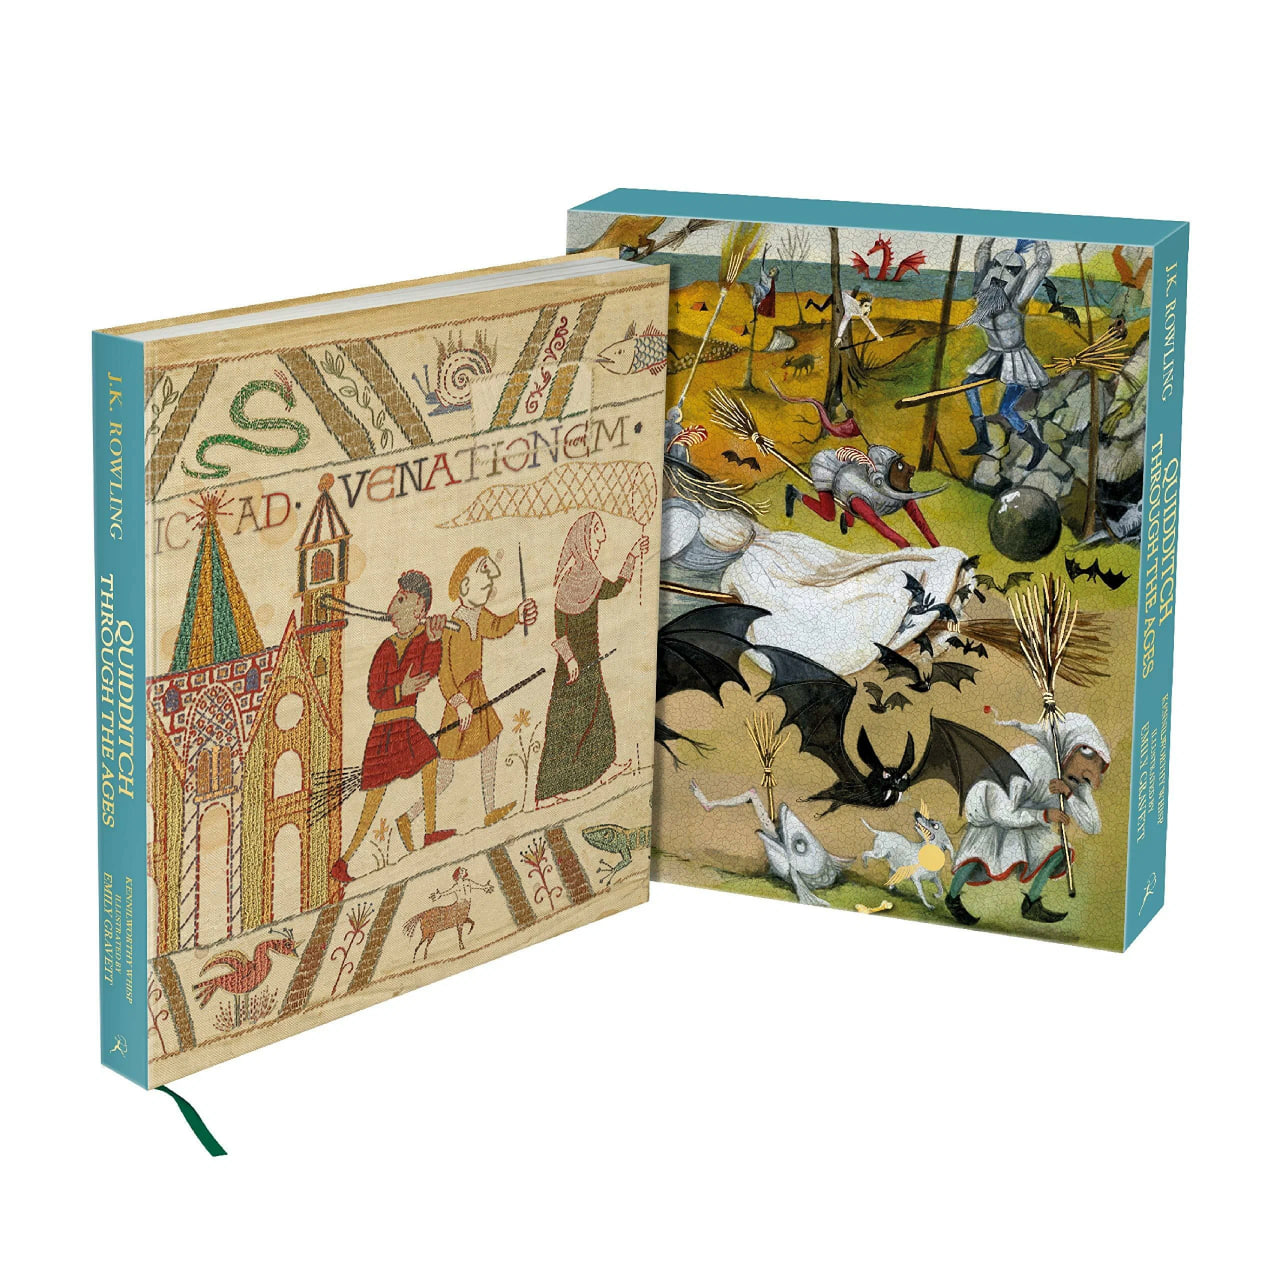 Rowling J.K. Quidditch through the ages - illustrated ed box 